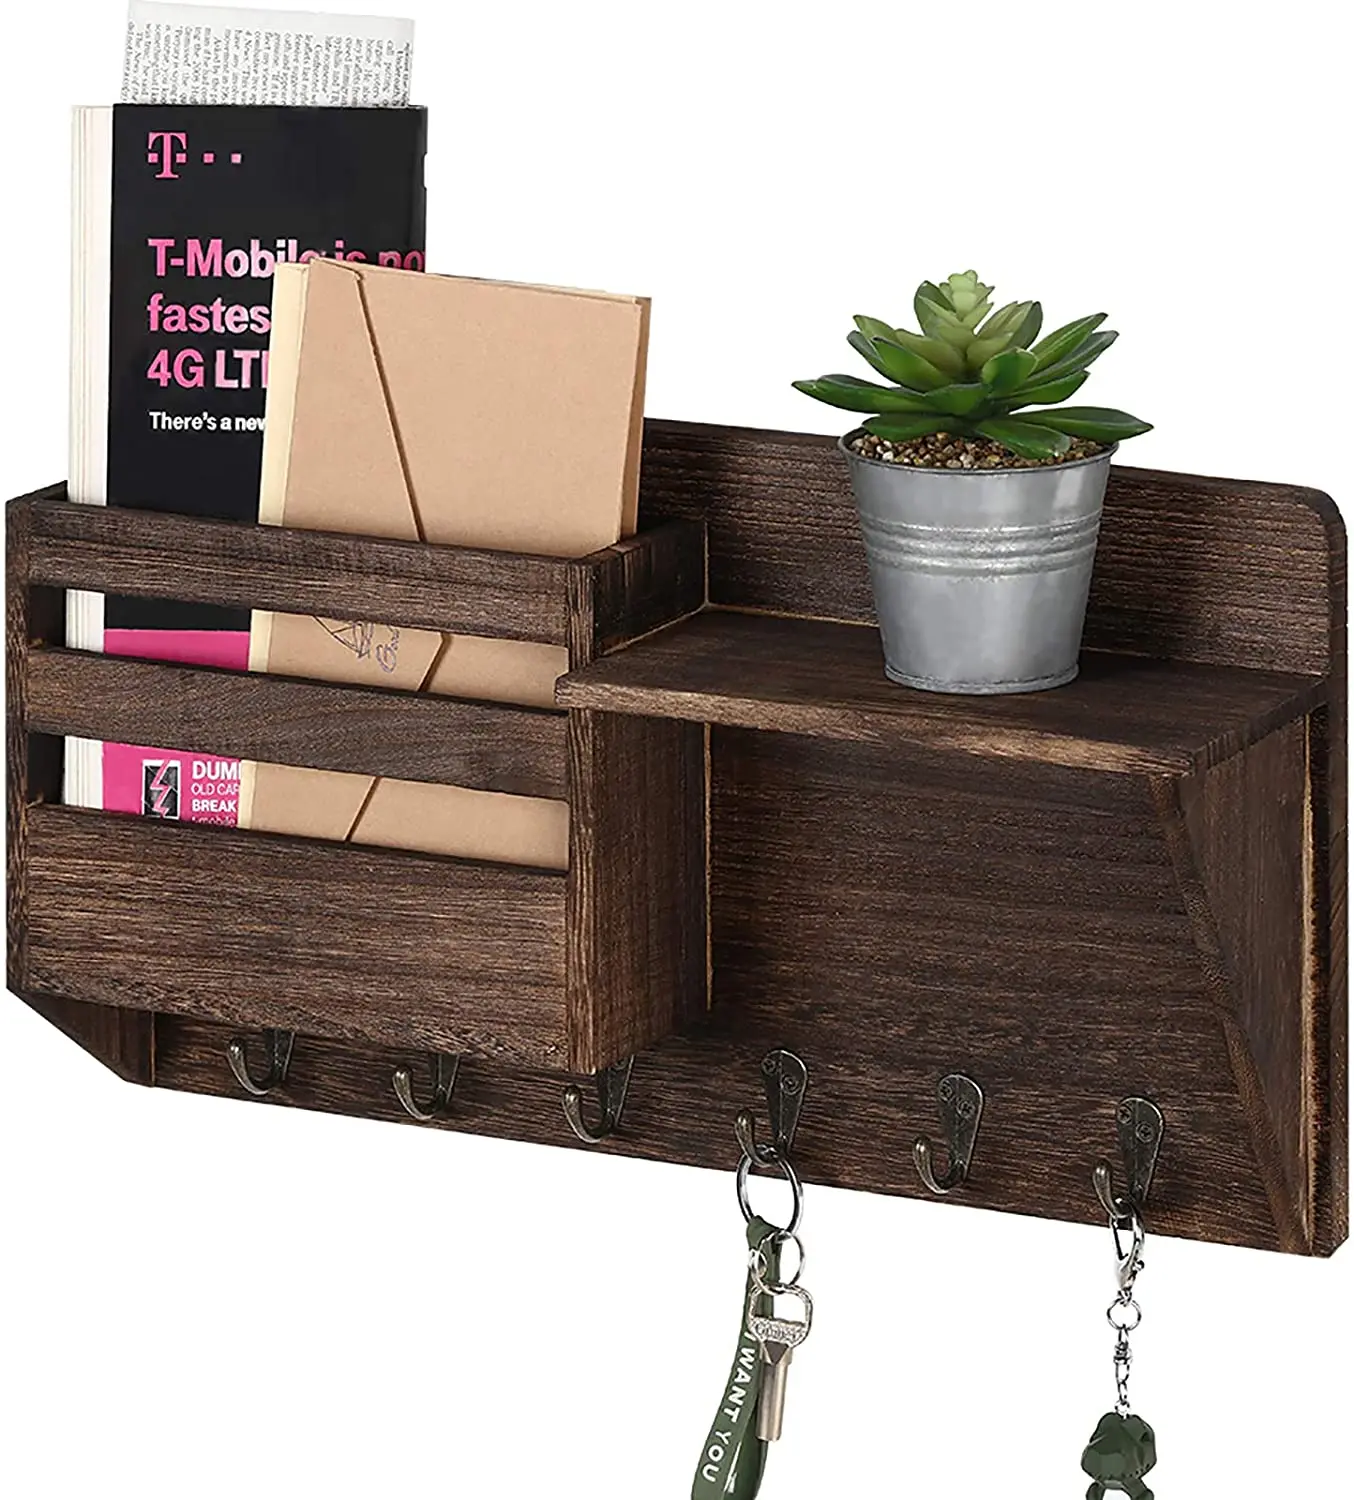 Mail Sorter Wall Mount Mail & Key Holder Organizer with 3 Key Hooks, 1 Compartment, and Shelf (62500073055)